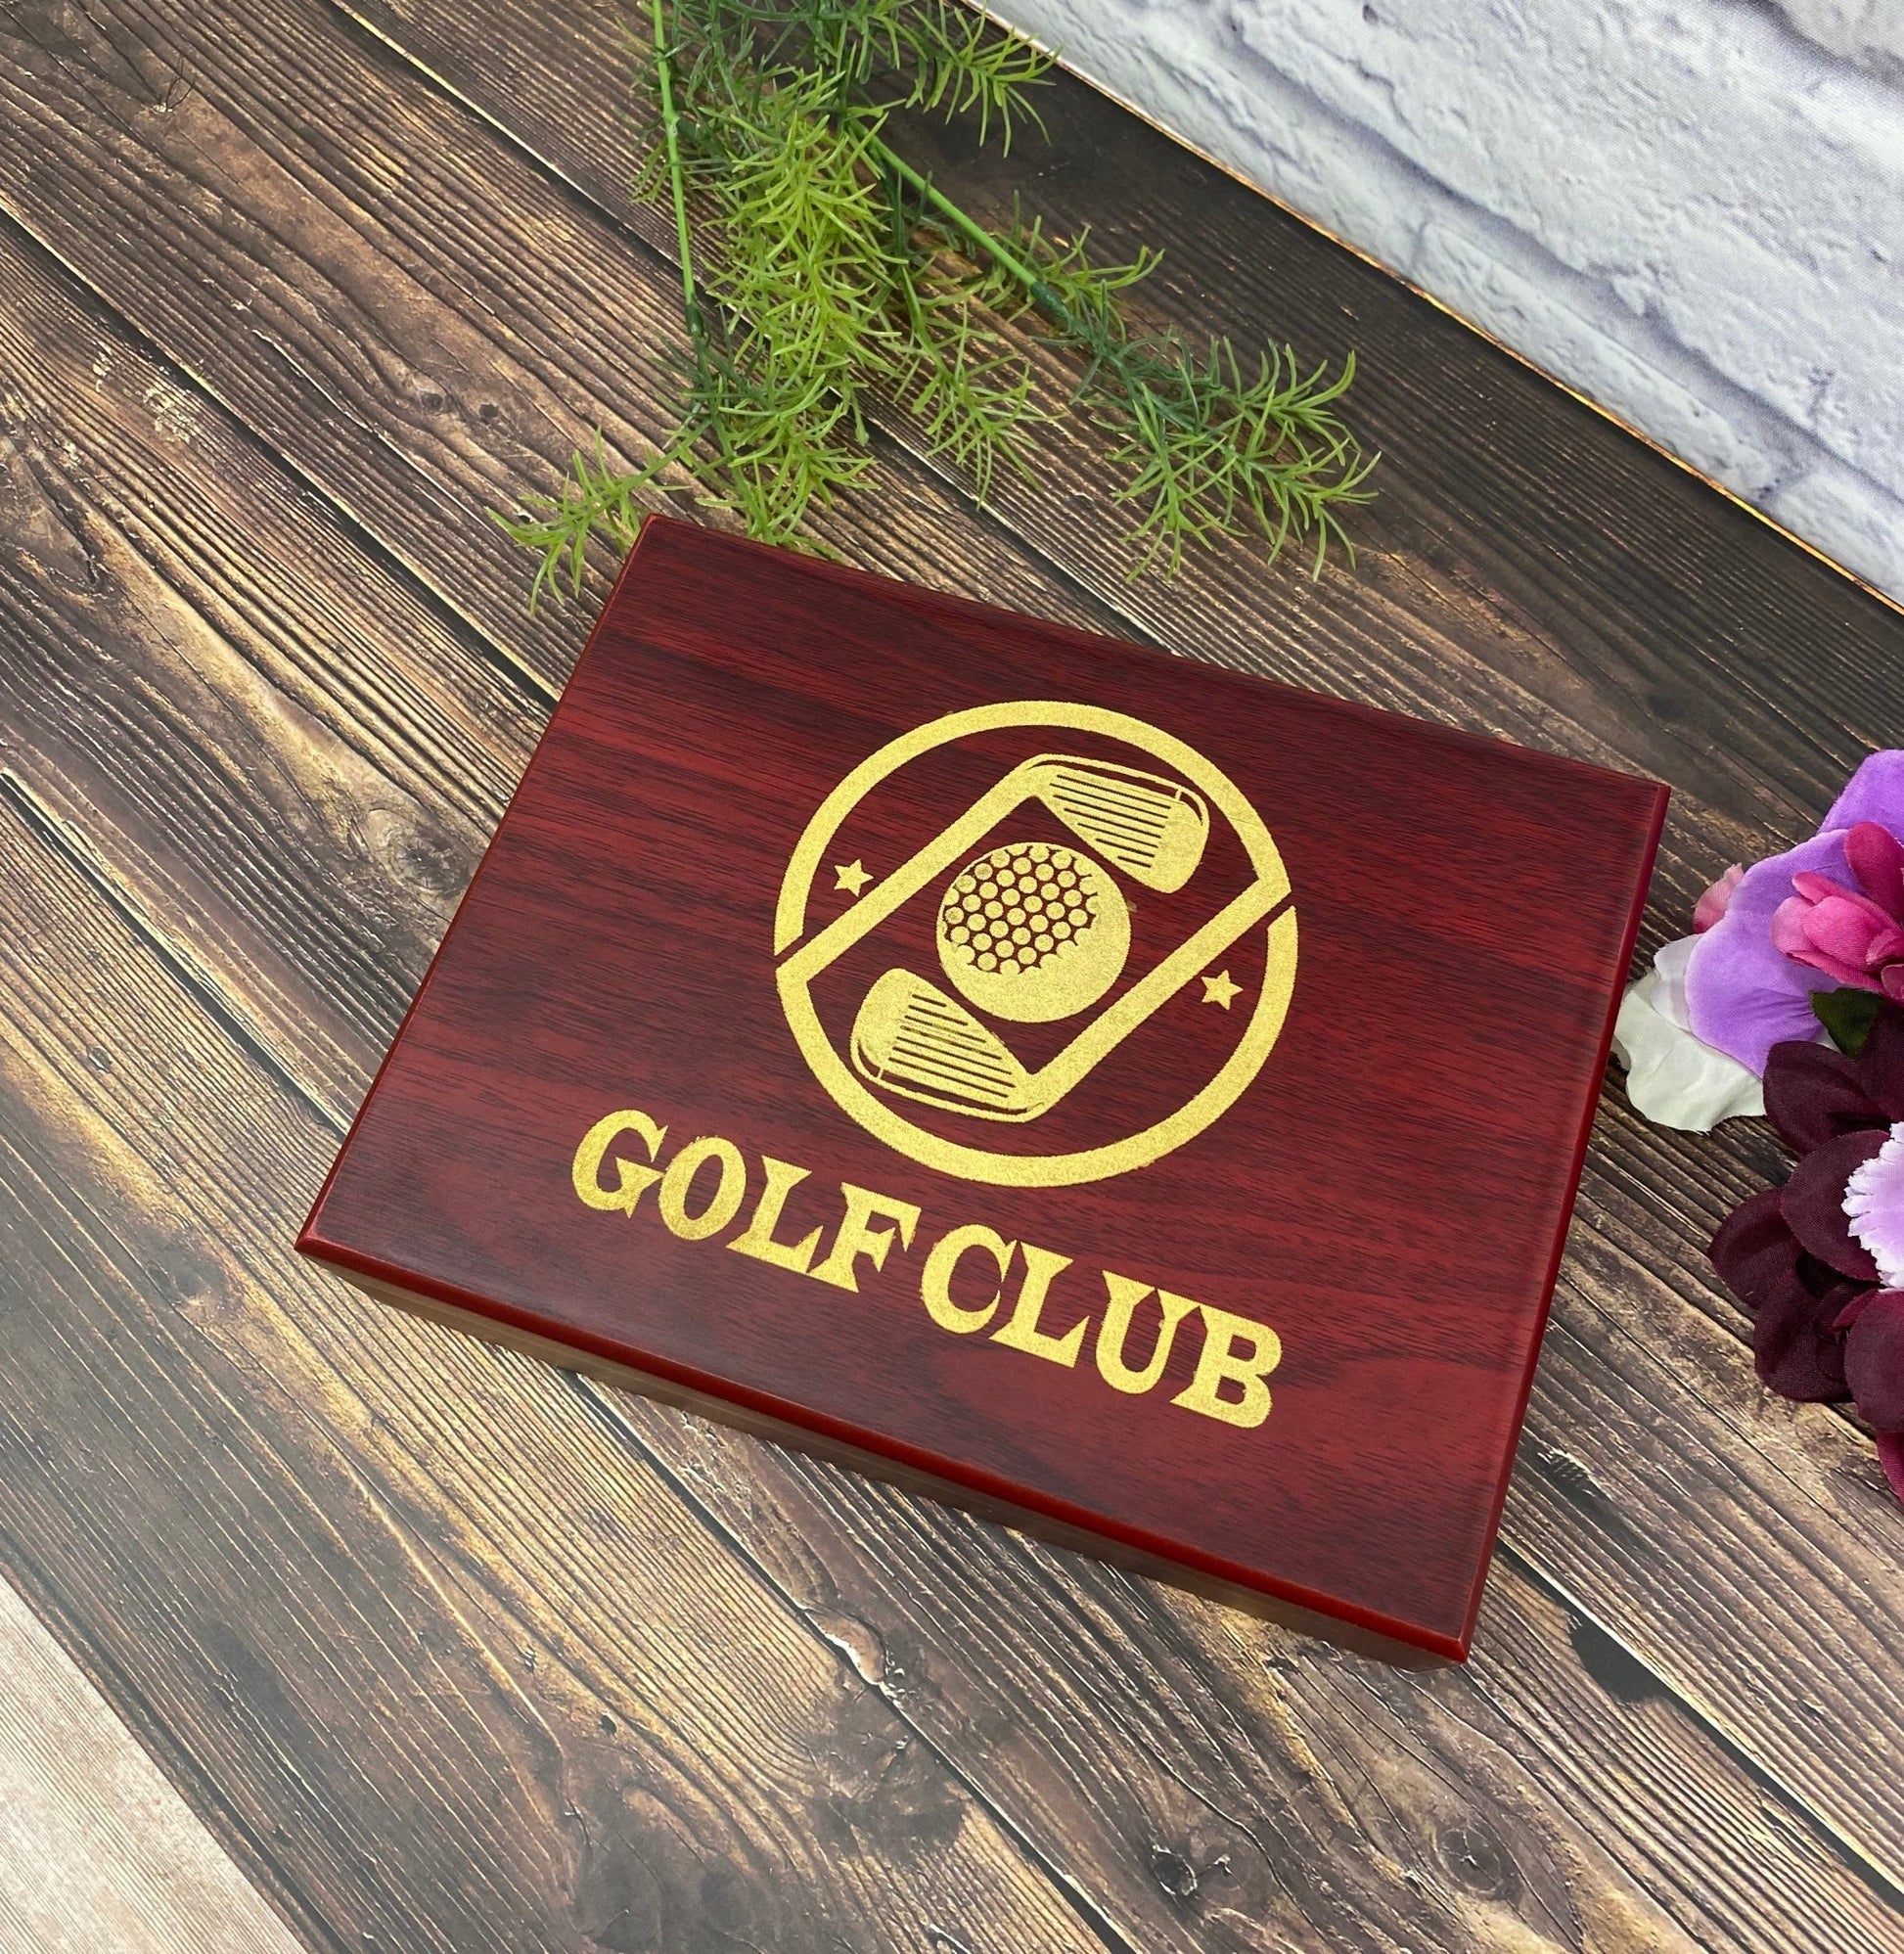 Personalized Golf Balls Box Gift for Birthday Wedding, Gift for Dad Husband Wife